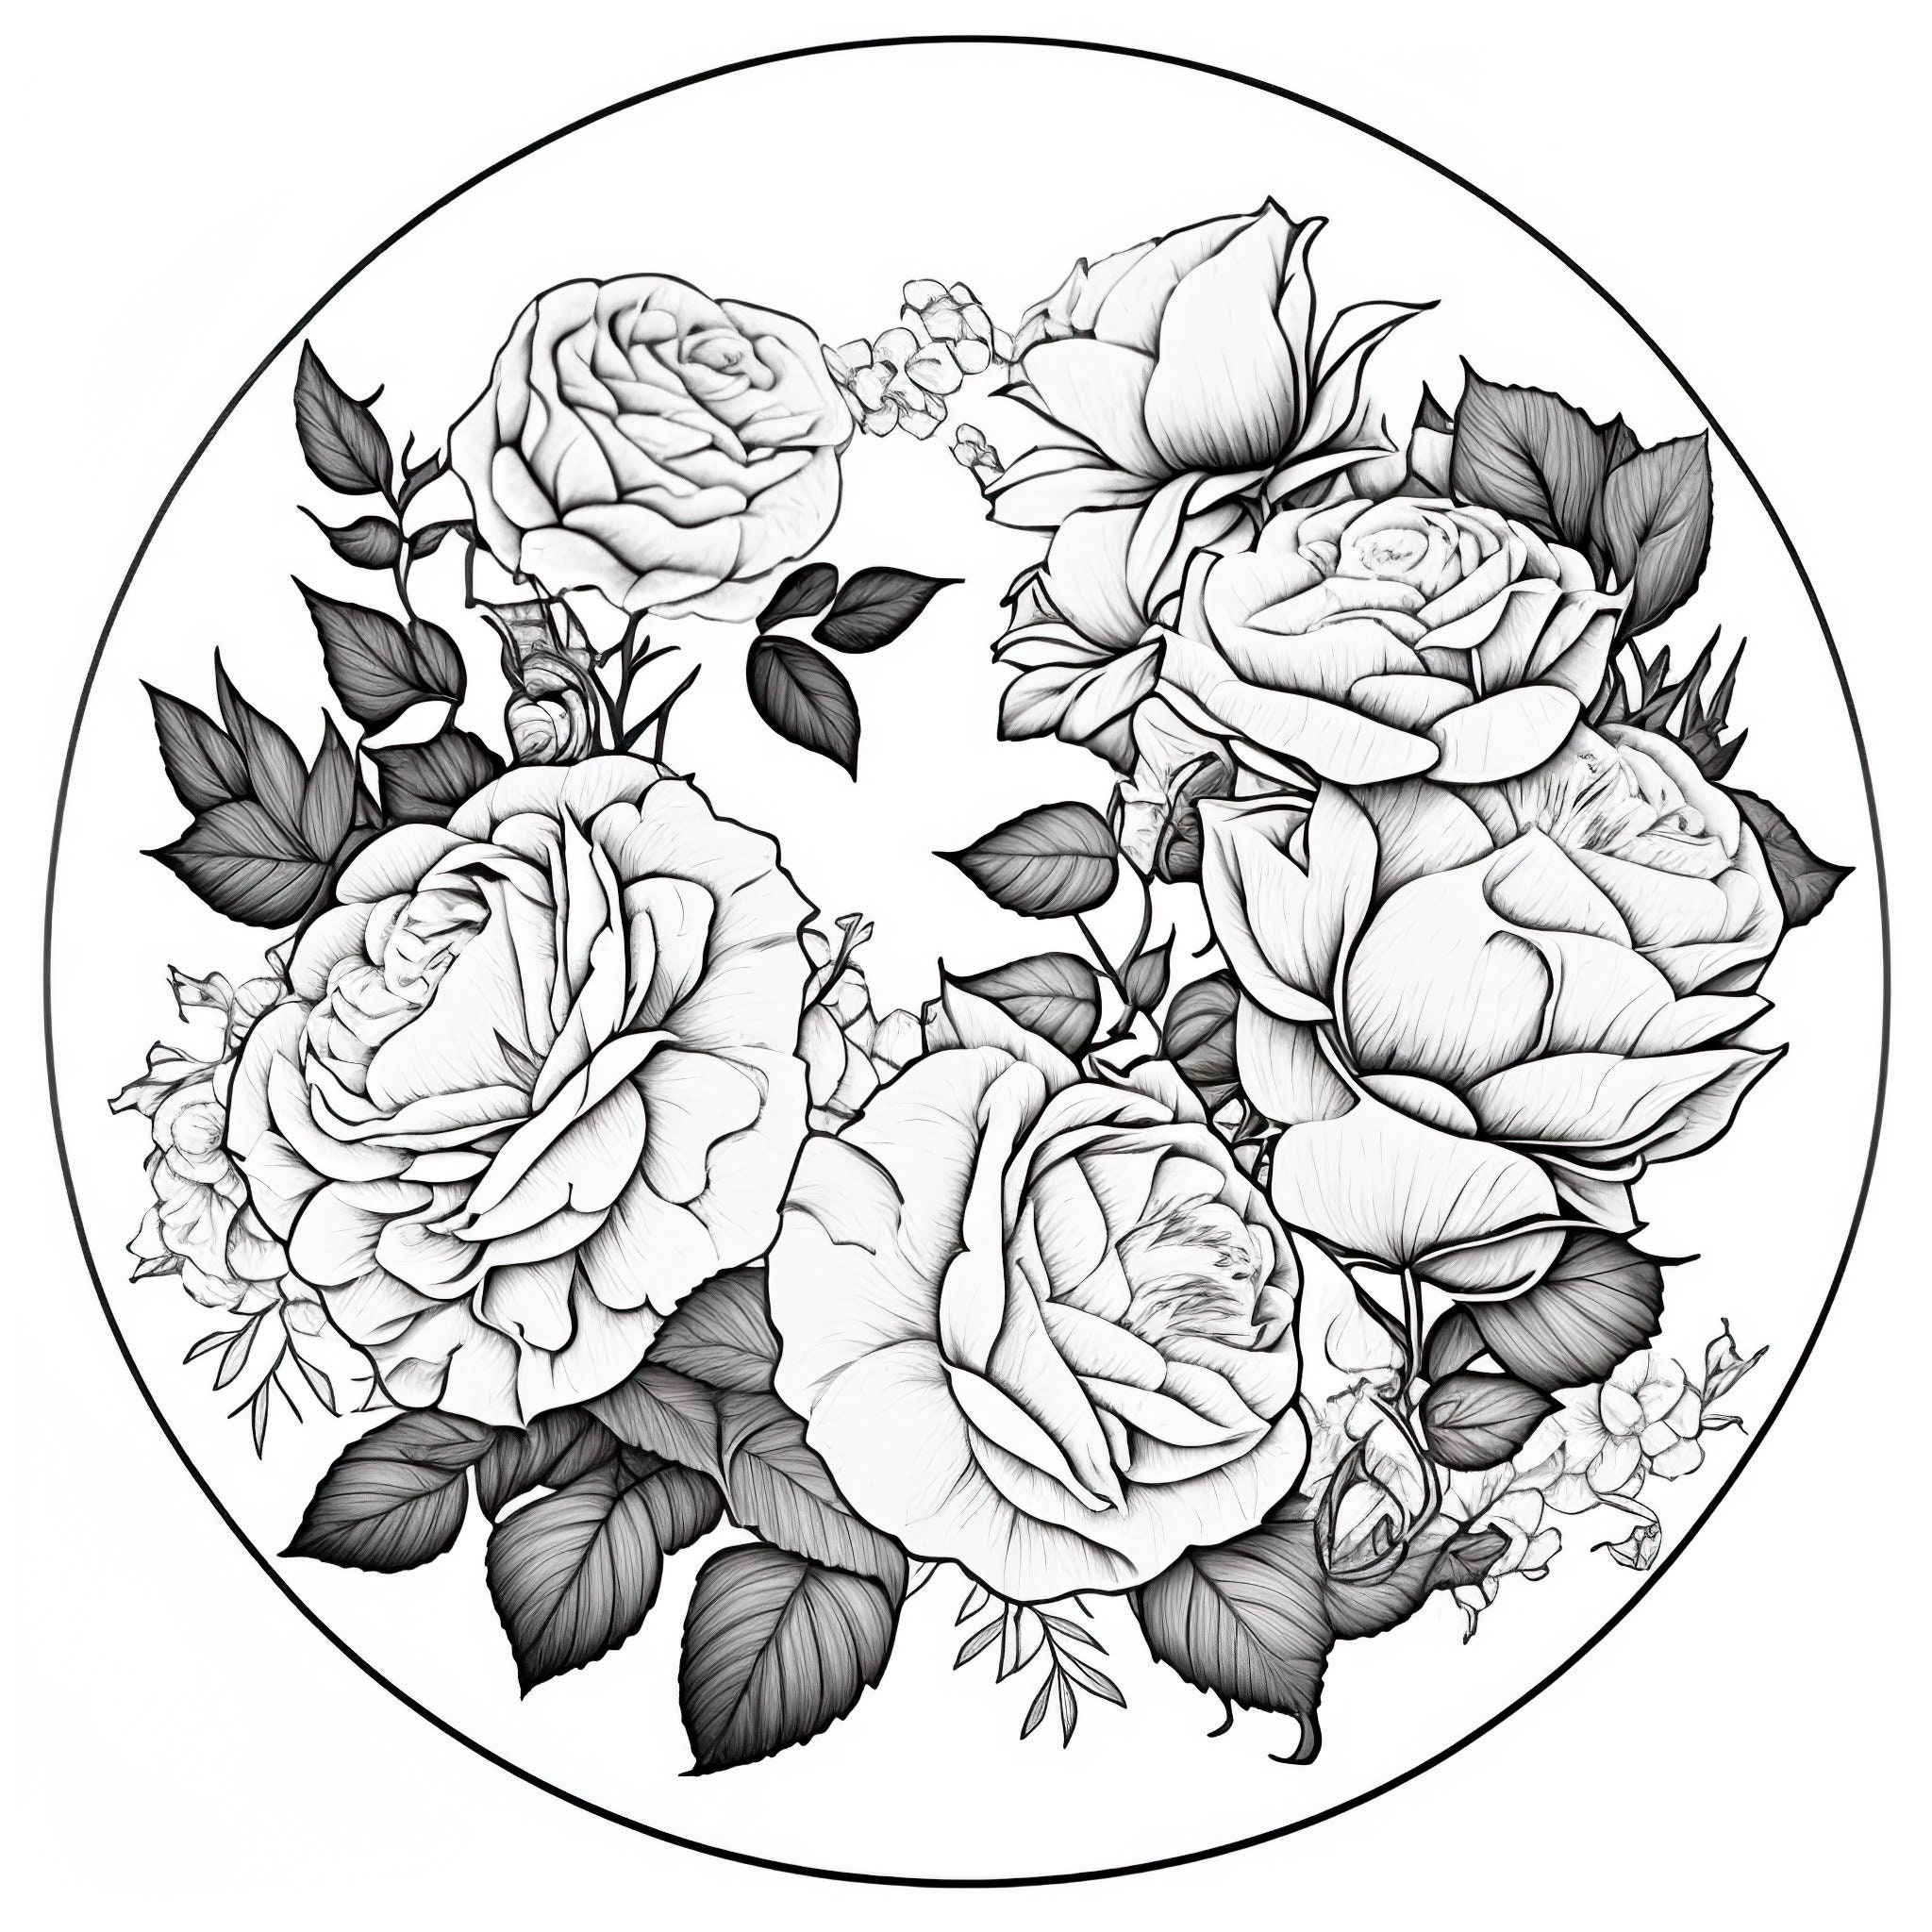 Flower Coloring Pages for Adults Graphic by Design Creator Press